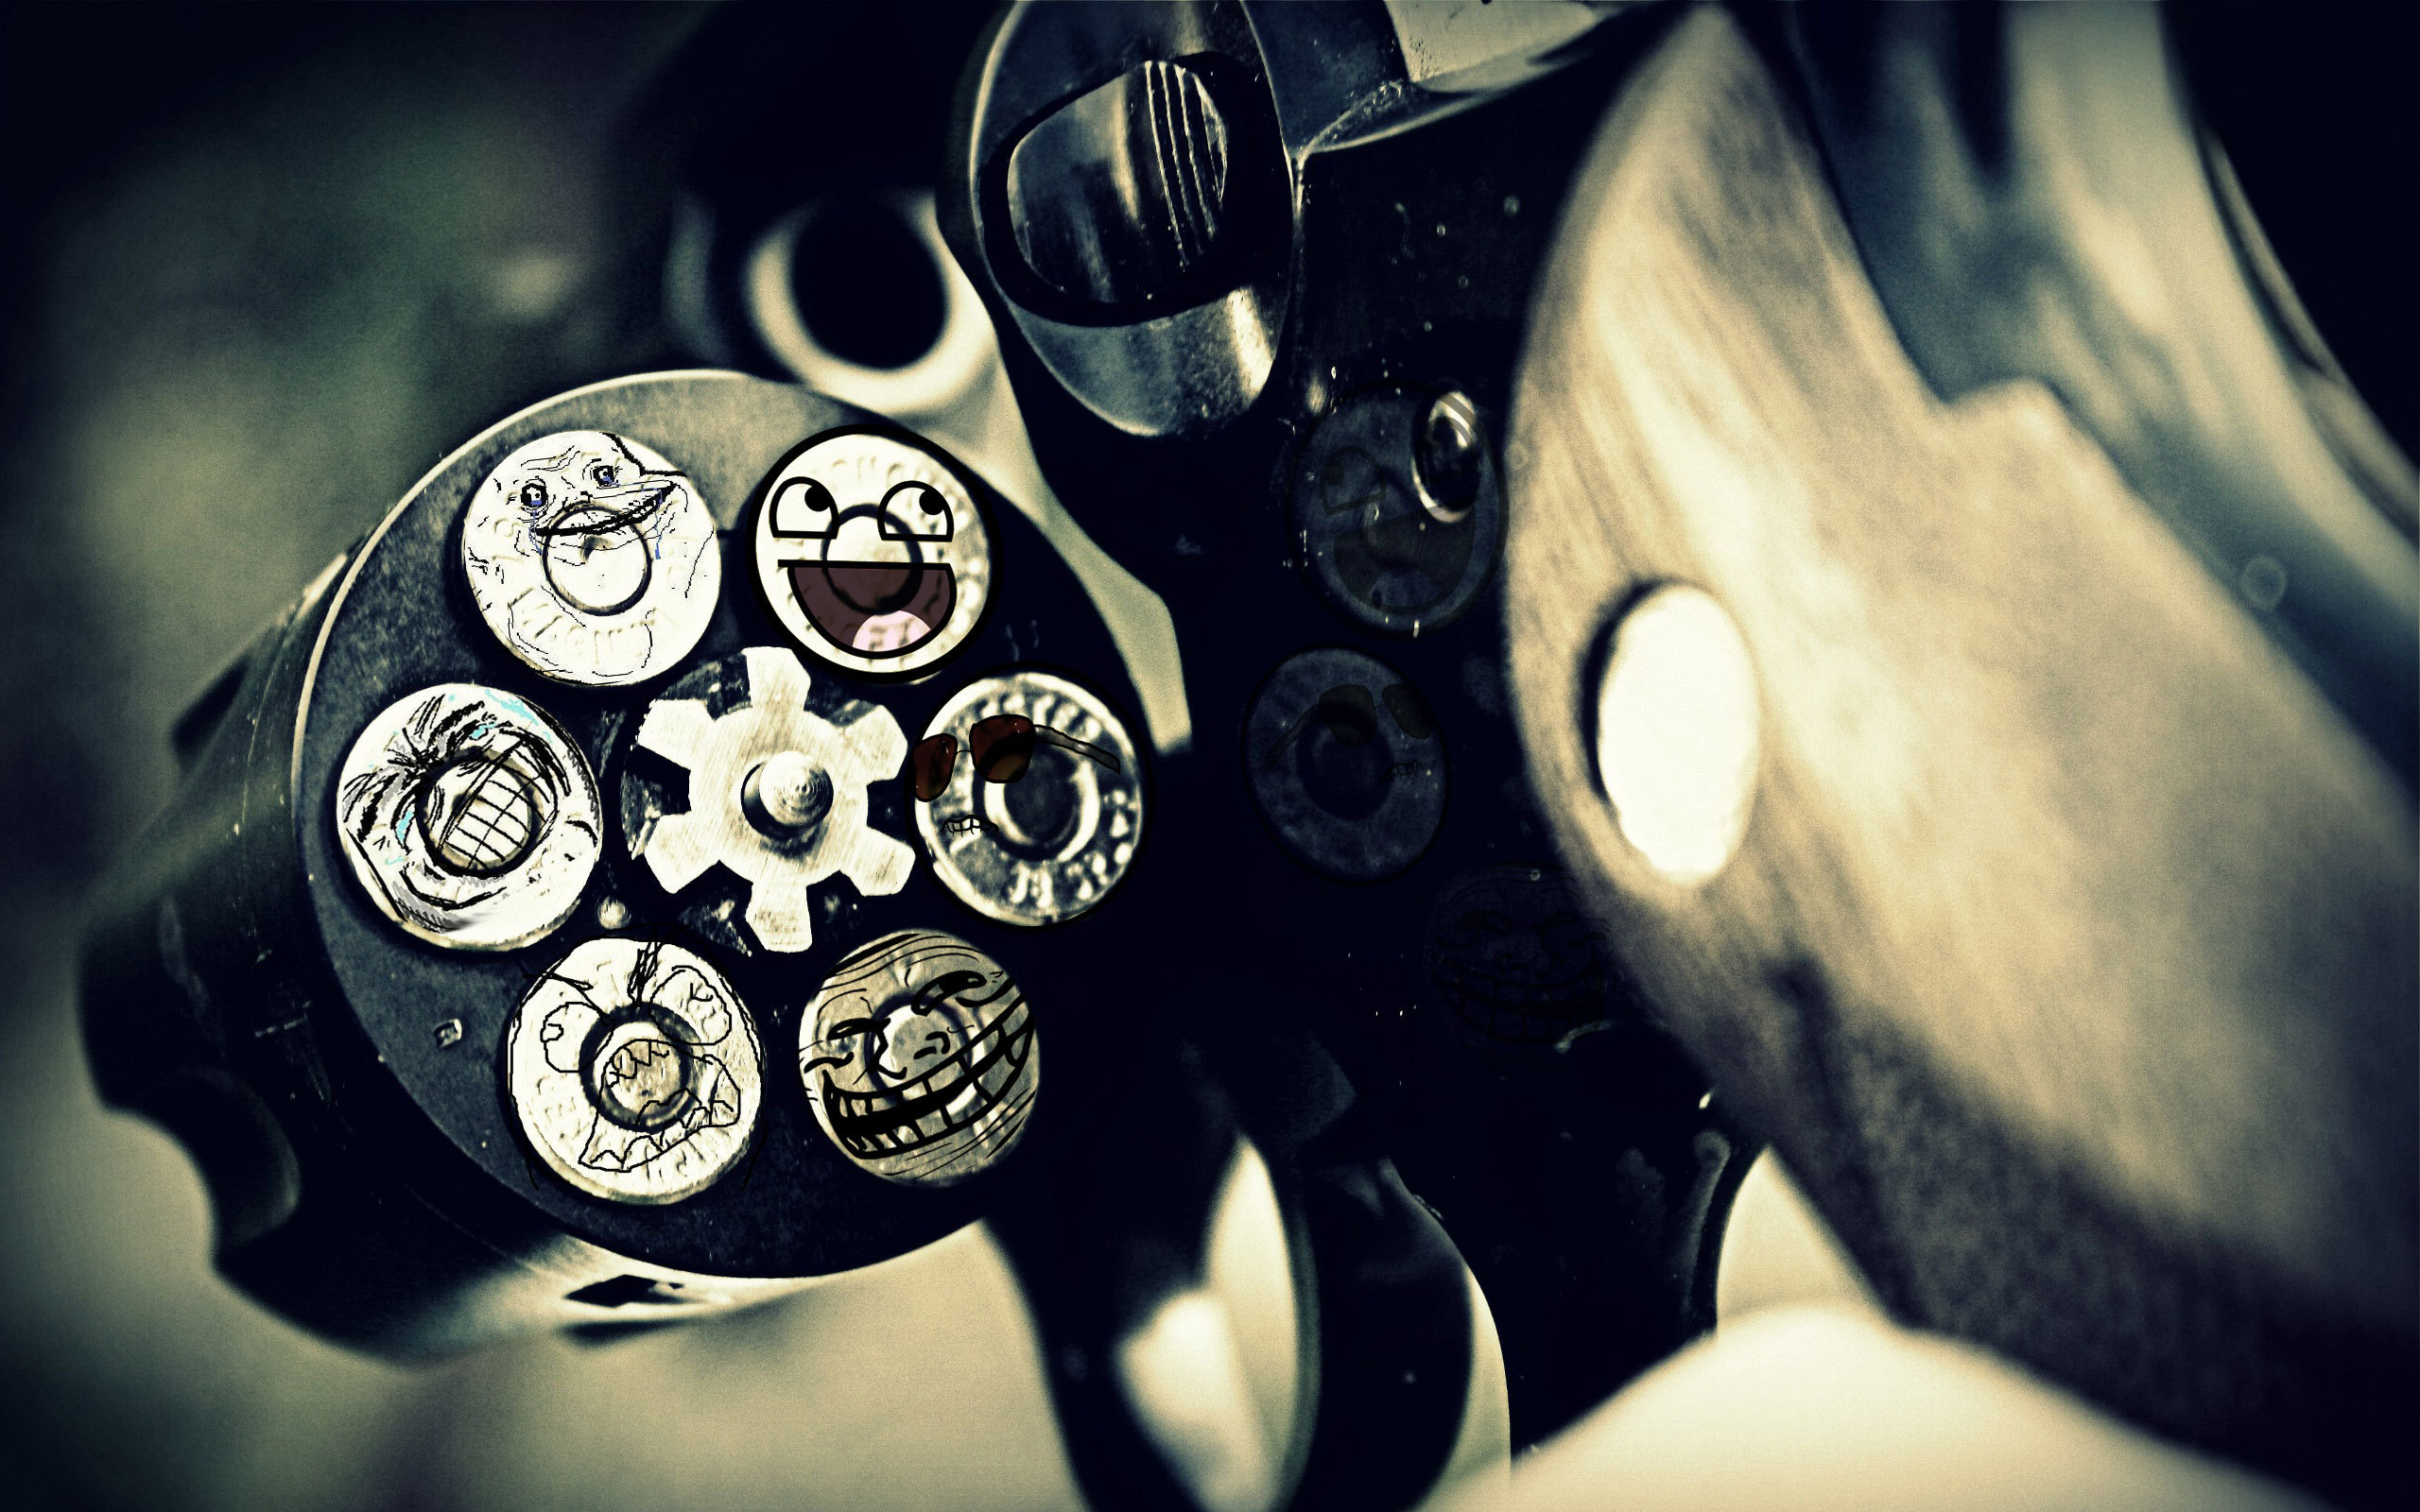 Weapons Revolver HD Wallpaper | Background Image